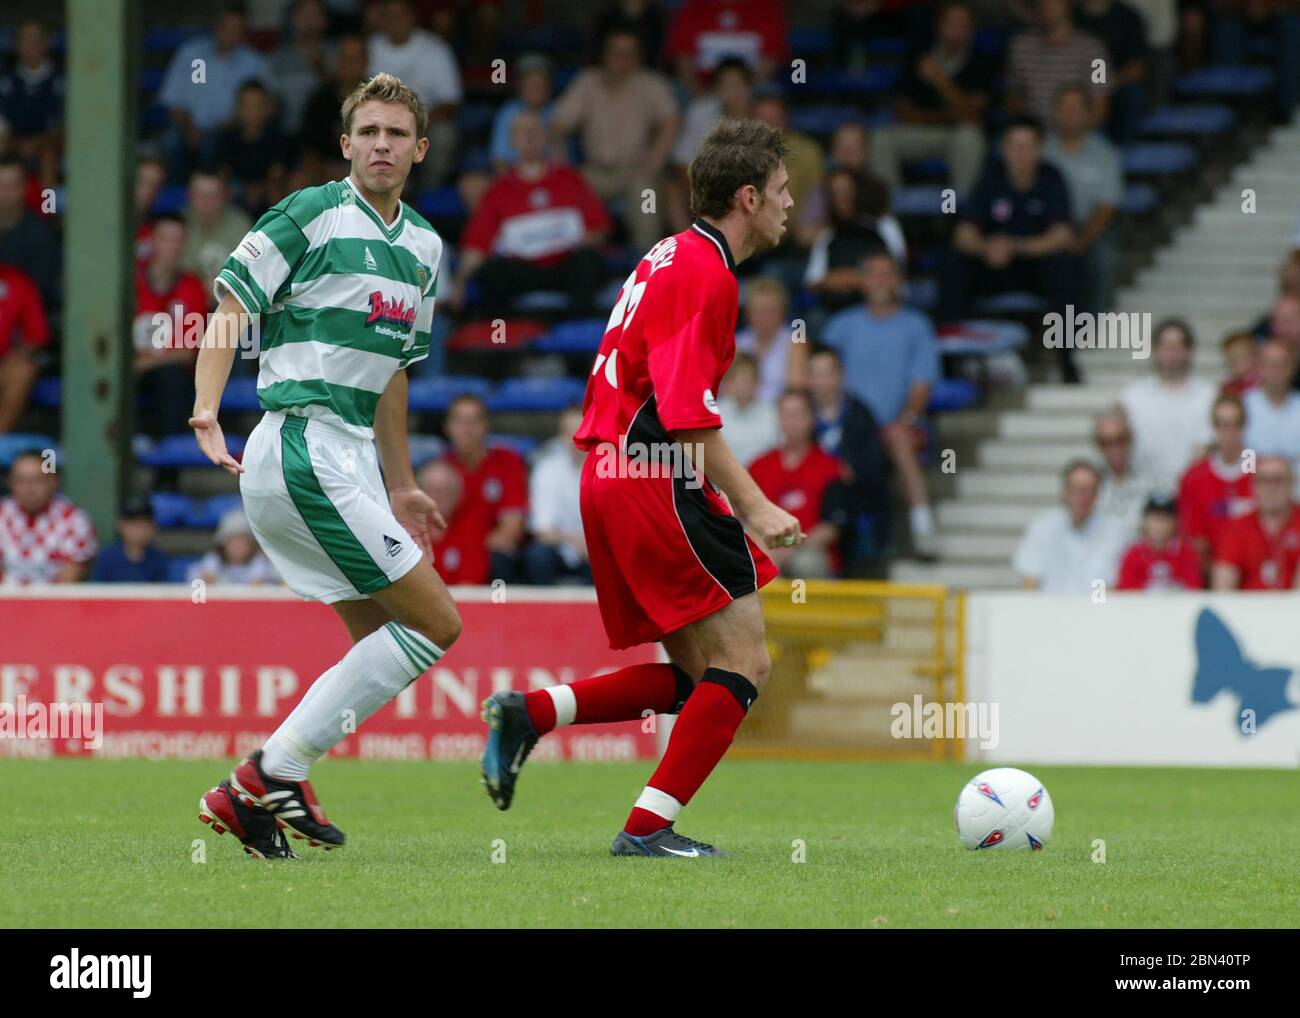 LONDON, UK. AUGUST 23: Nick Crittenden of Yeovil Town  during League Division 3 between Leyton Orient and Yeovil Town at Matchroom stadium, London on Stock Photo